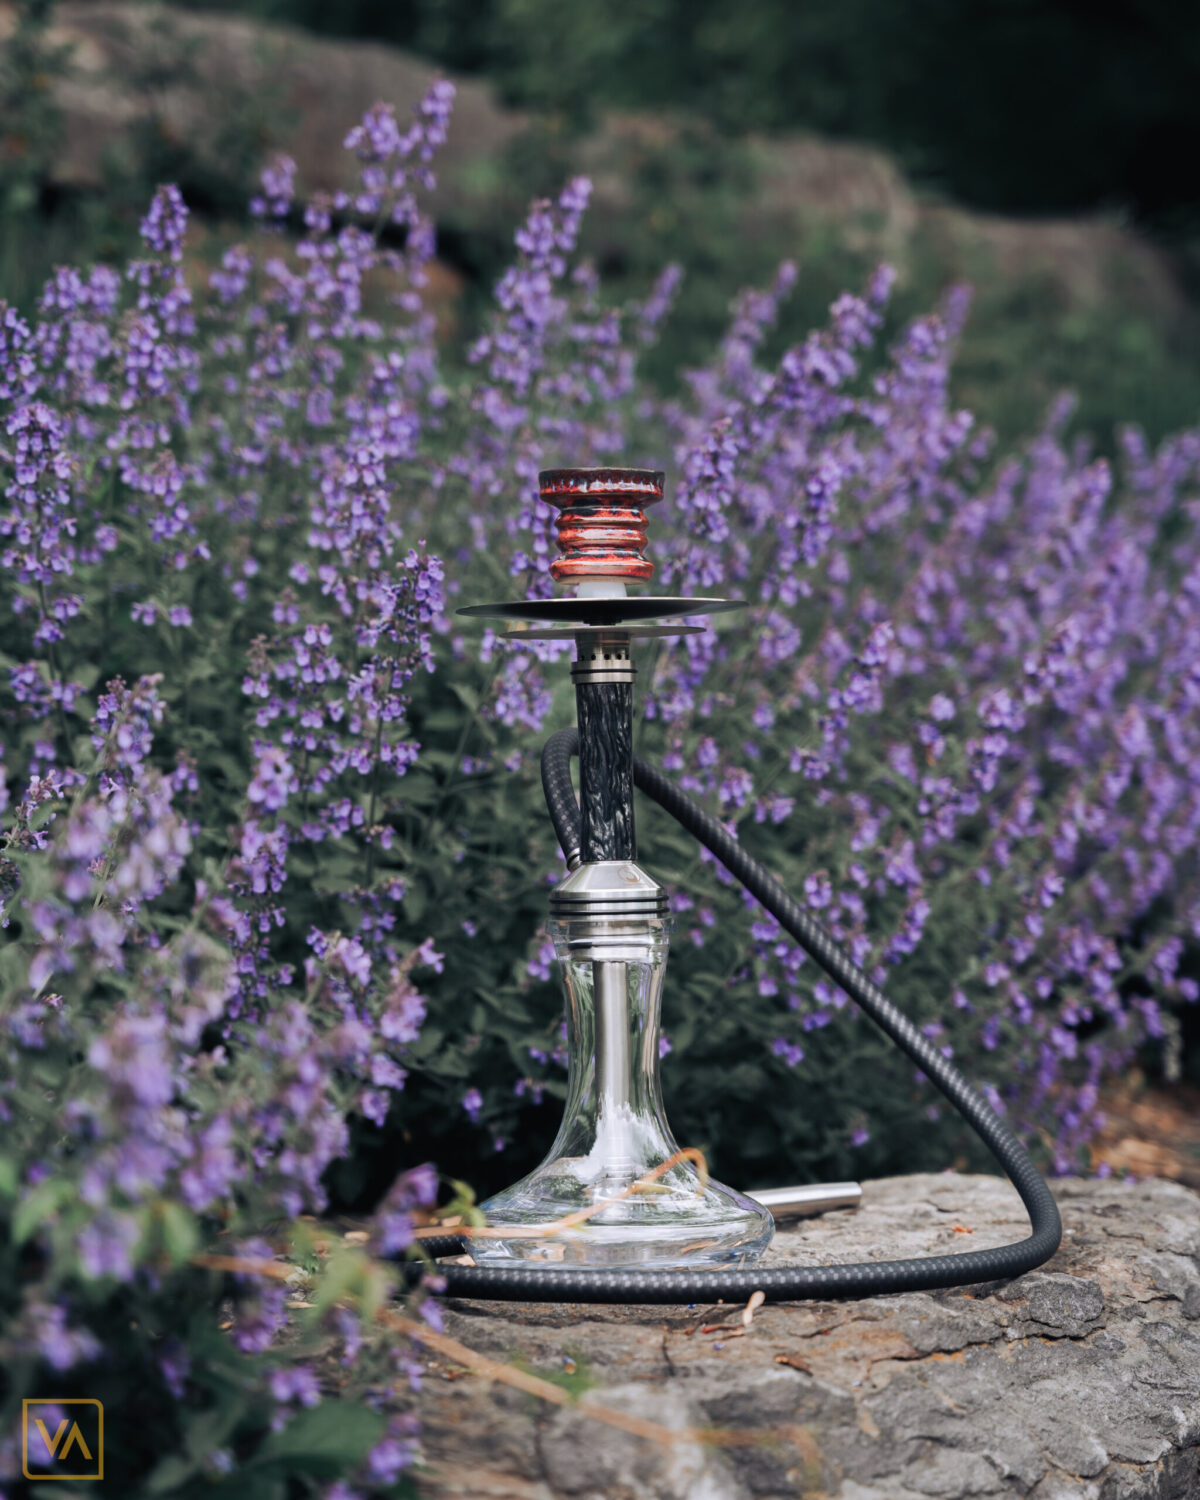 Steamulation Xpansion Mini Posed on rock surrounded by flowers and greenery with a Mason Helyx Bowl, Konus 1 Handle on Carbon Dschinn Silicone and a AO Stainless Steel Support Strainer